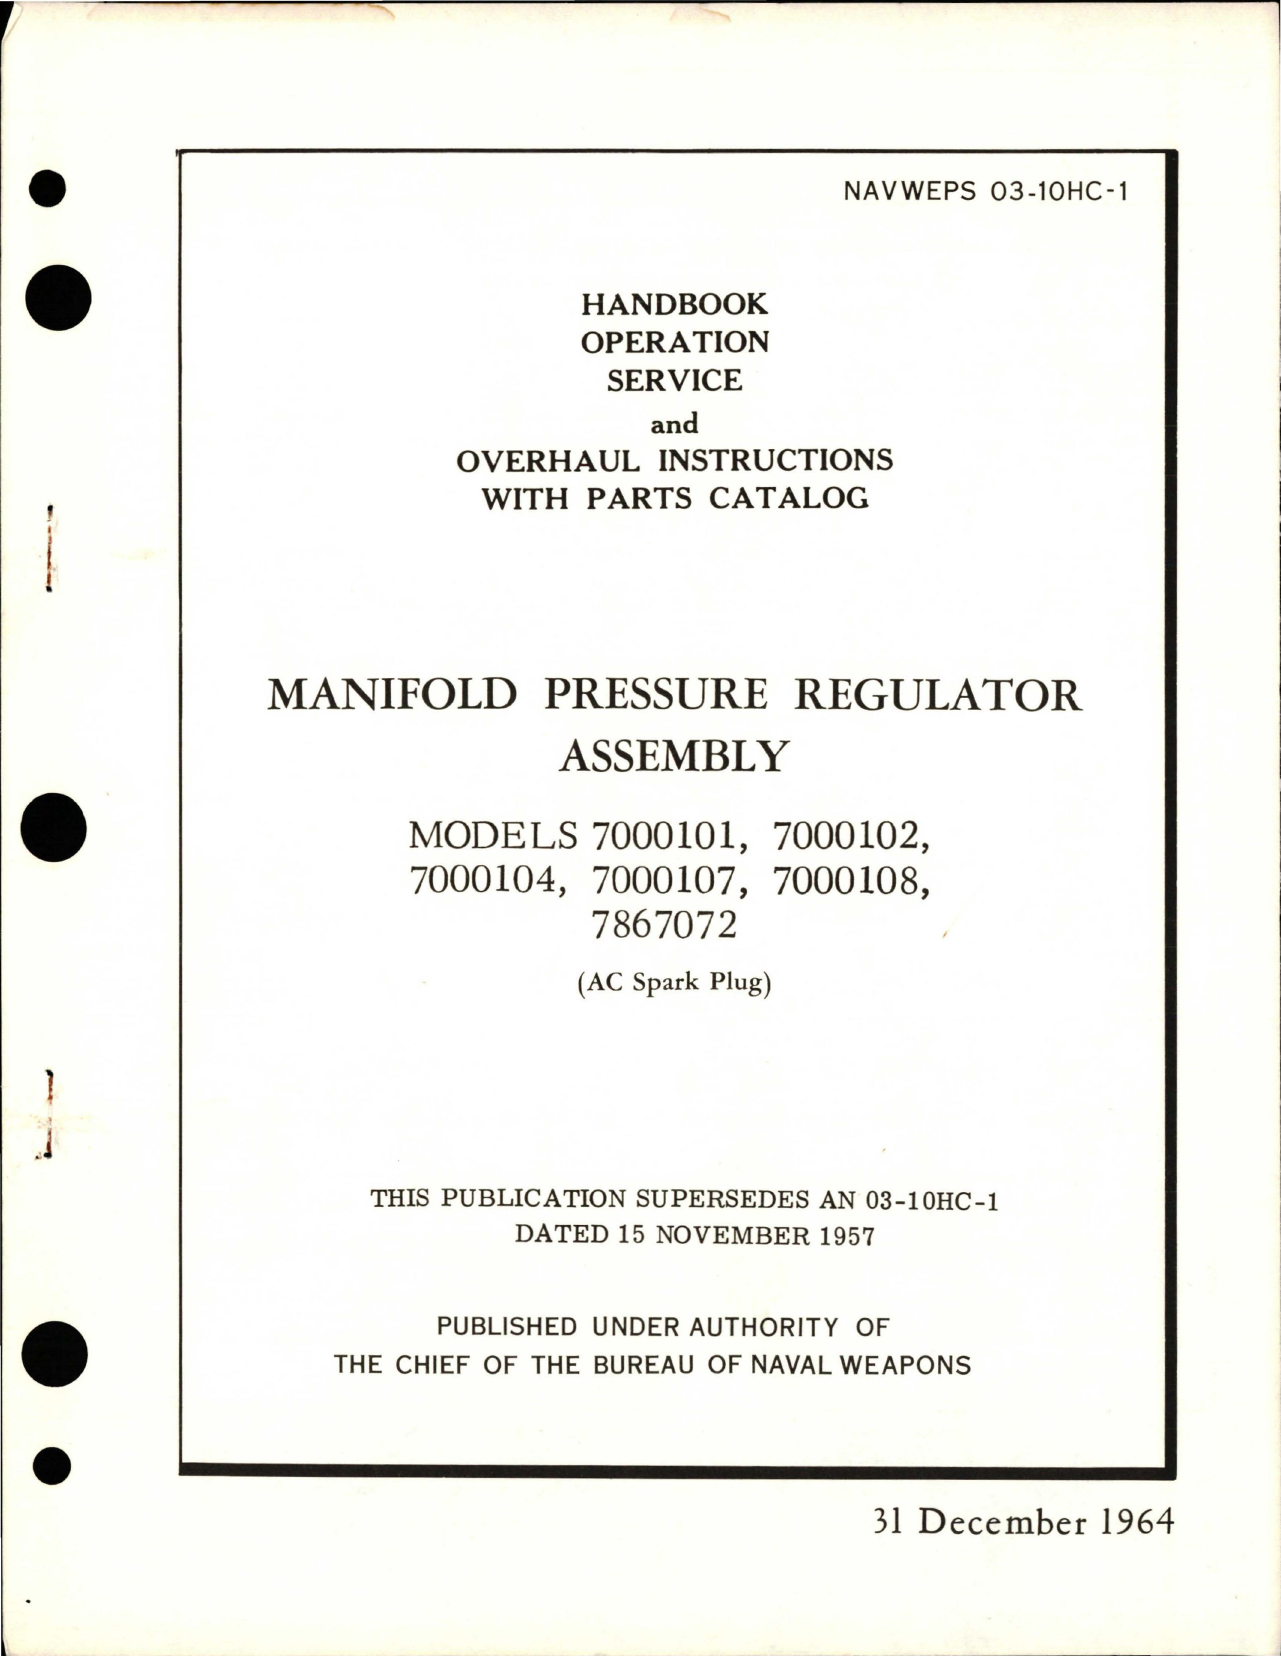 Sample page 1 from AirCorps Library document: Operation, Service, Overhaul Instructions with Parts Catalog for Manifold Pressure Regulator Assembly